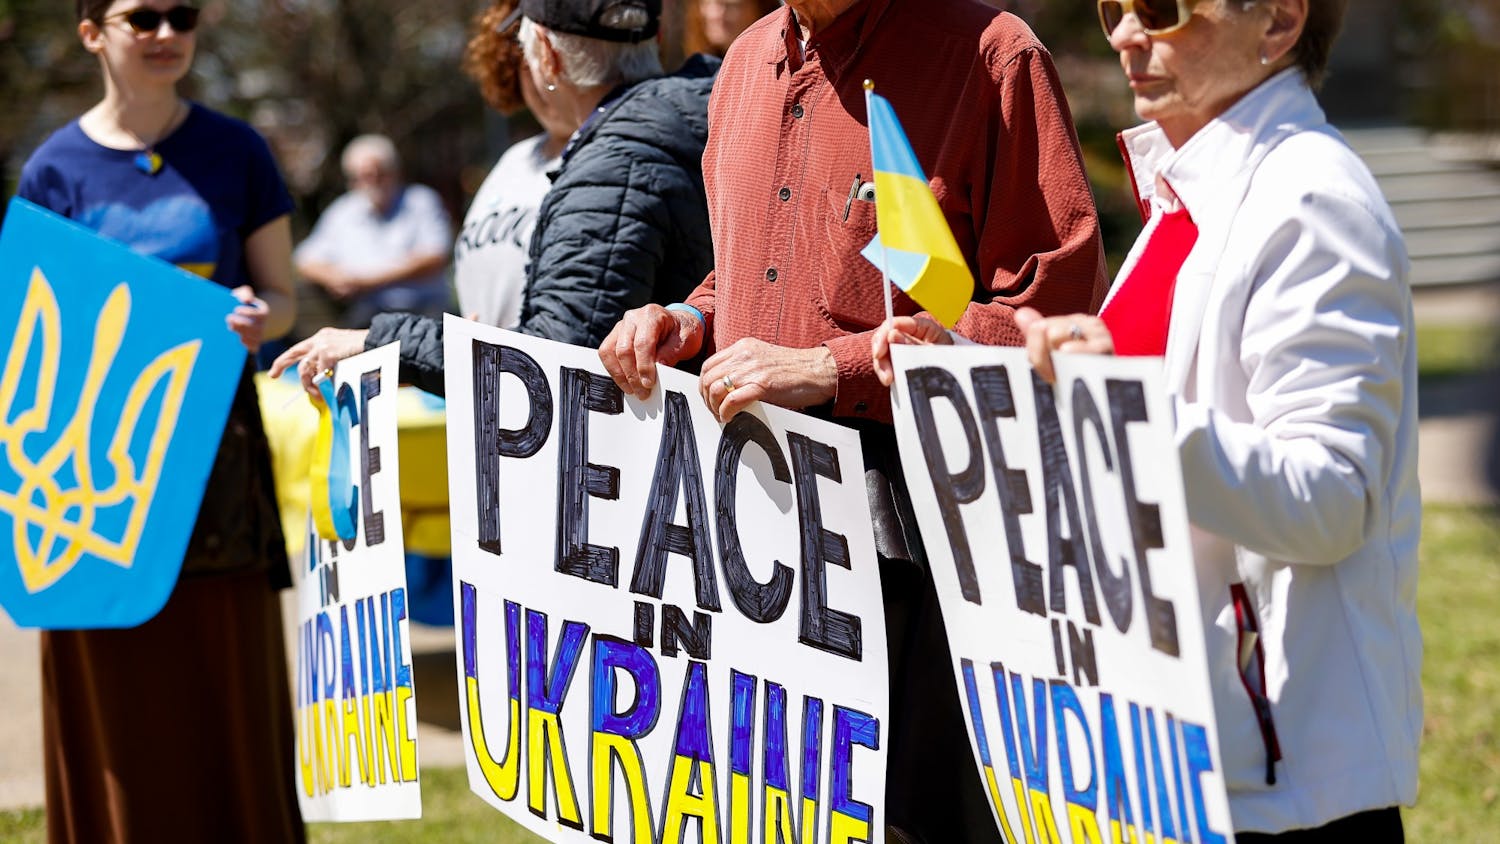 Attendees hold signs in support of Ukraine during the Stand with Ukraine Rally and March at the South Carolina Statehouse on April 2, 2022. The rally was held as a response to Russia's invasion of Ukraine.